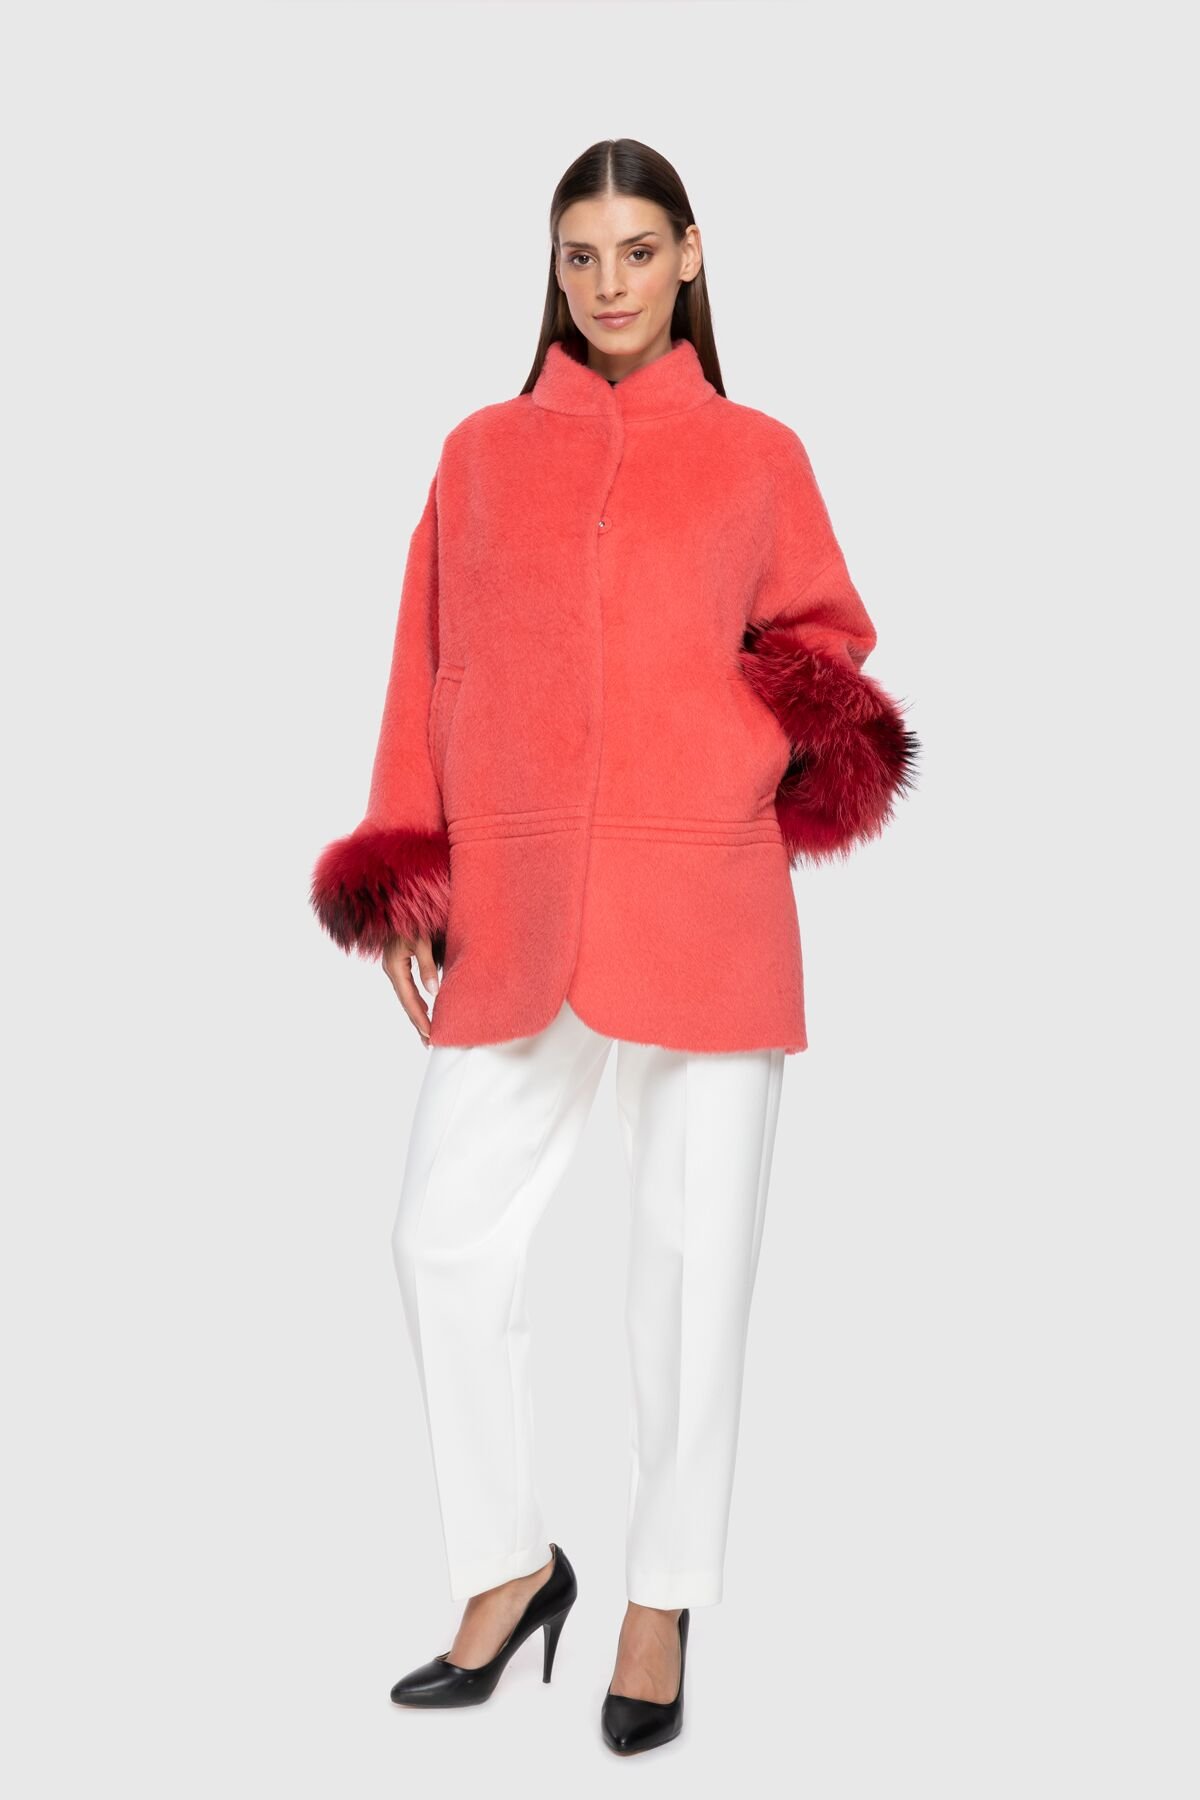 Fur Detail Wide Cut Red Cachet Coat with Sleeves